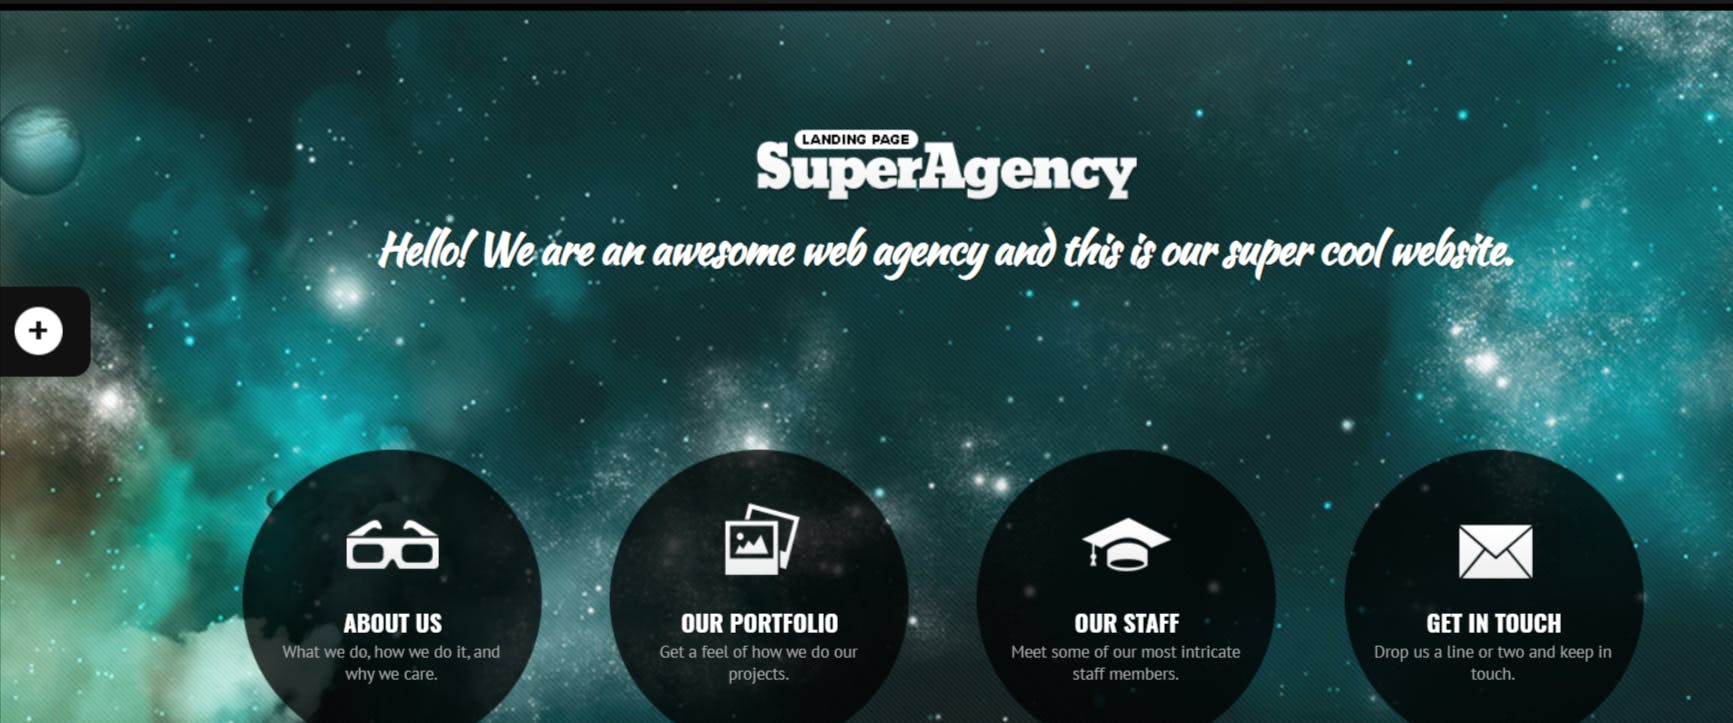 Super-Agency-Responsive-Landing-Page-Preview-ThemeForest.png